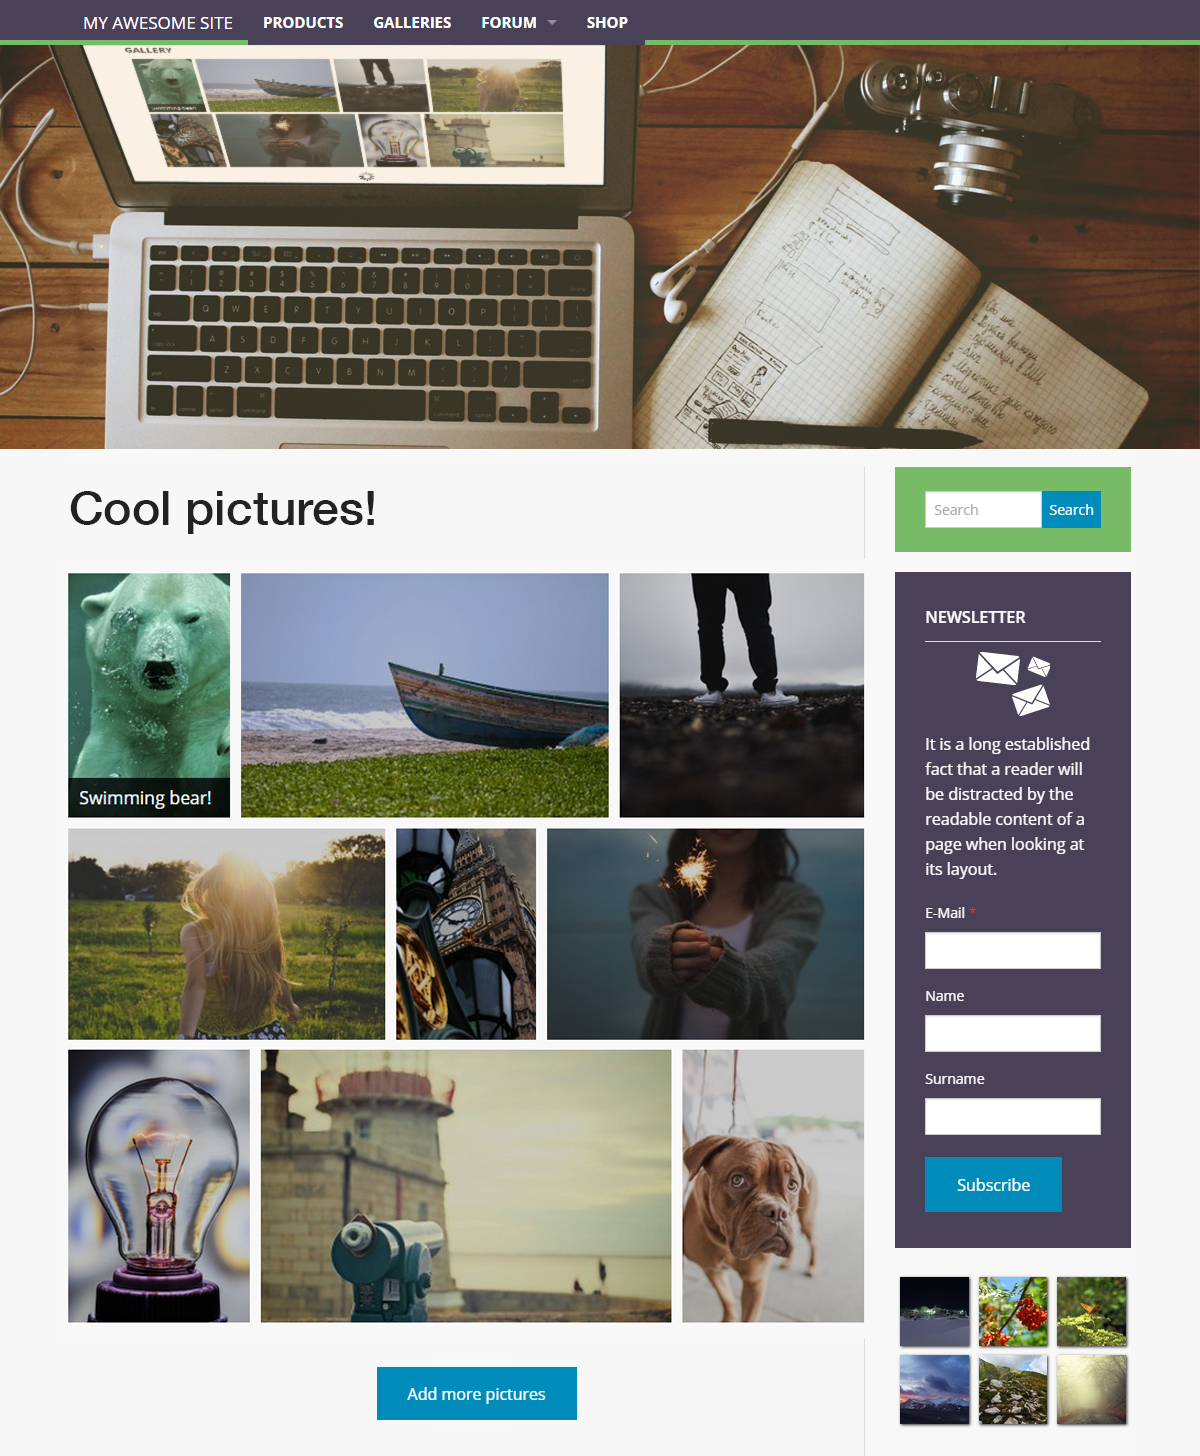 Example of a gallery generated with JustRows inside a wordpress site.